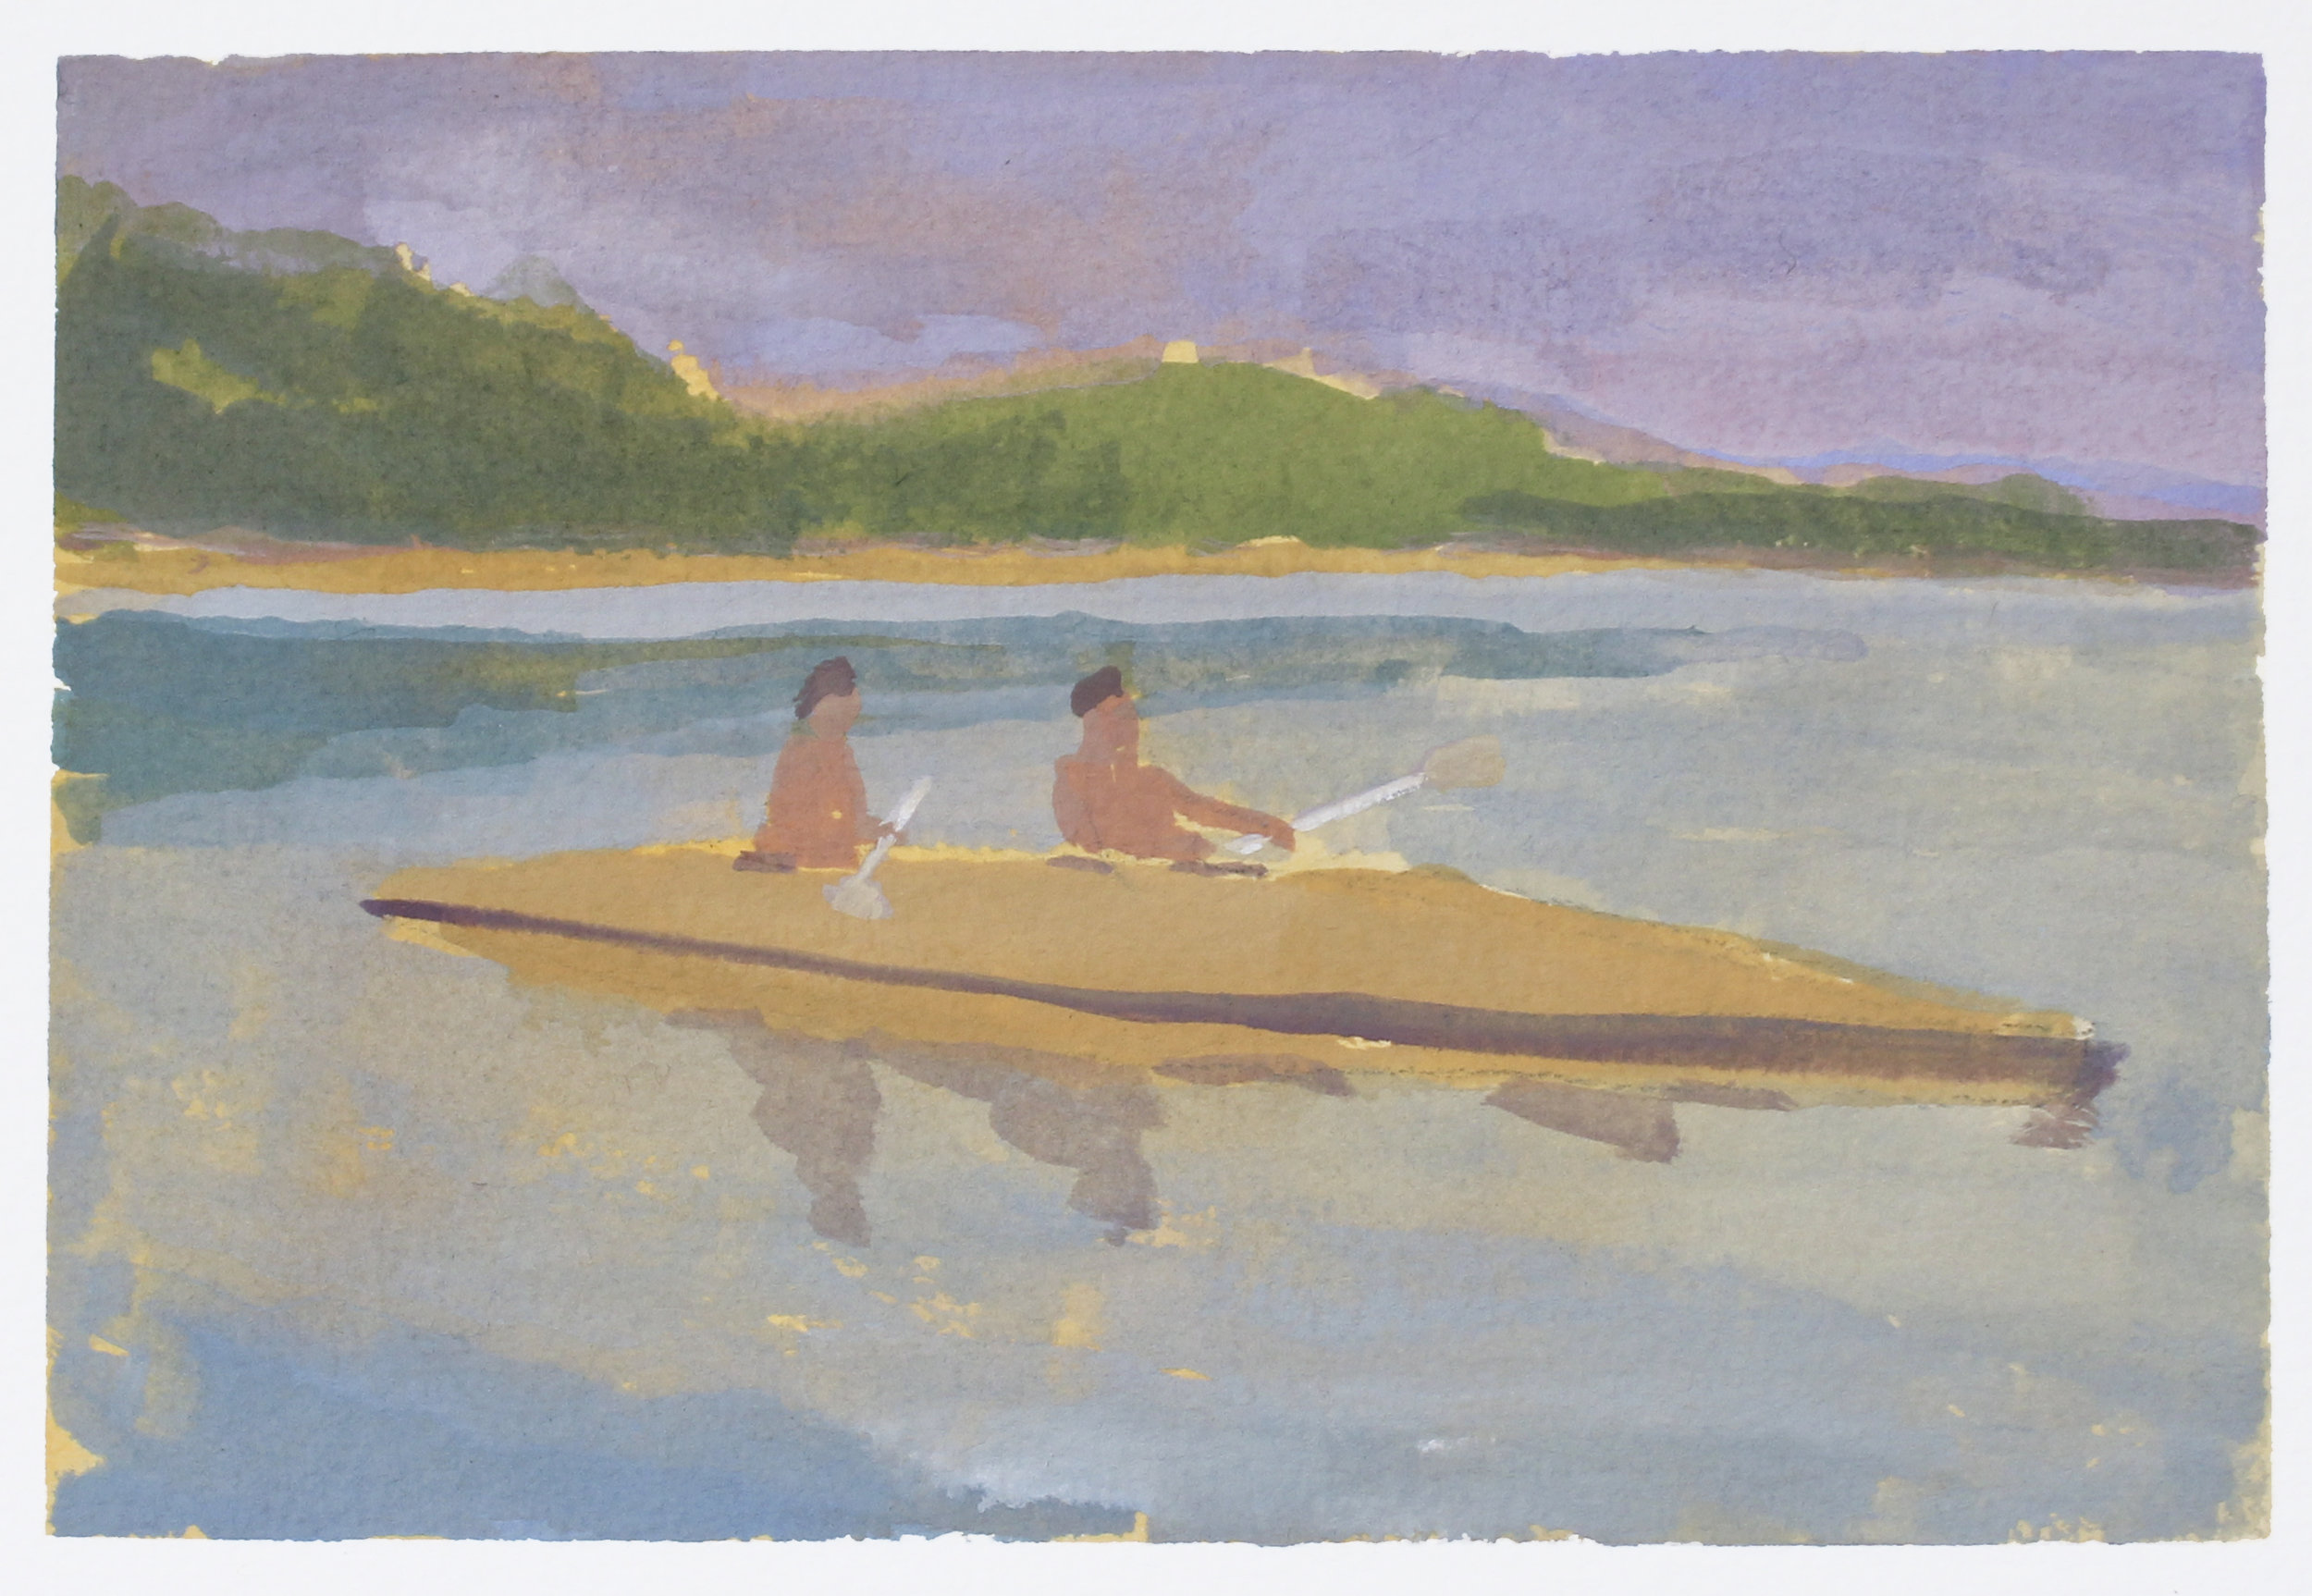    Canoe Near the Camp, 1936     gouache on paper 5x7.25” 2018   purchase  